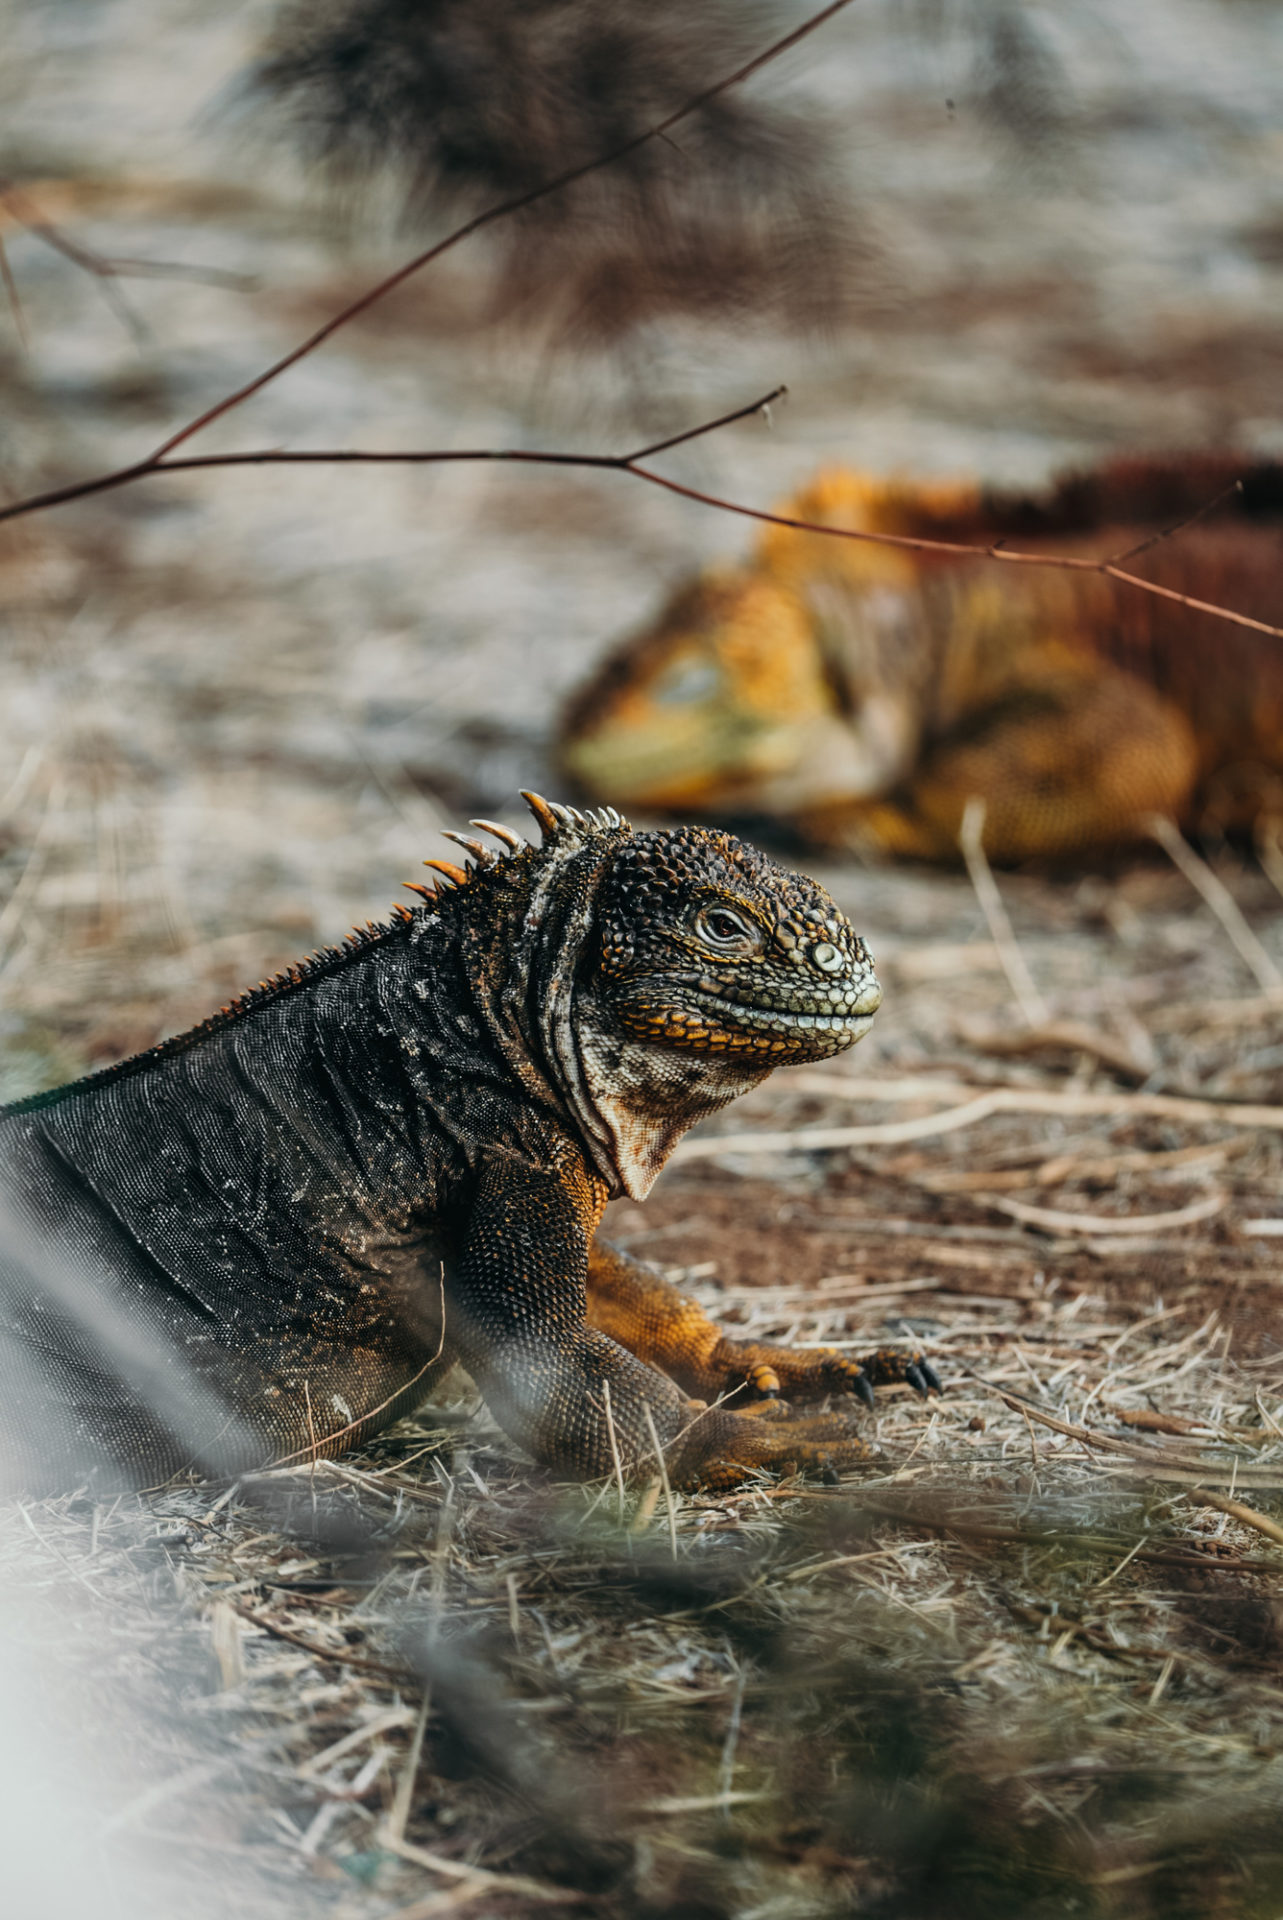 Male and female land iguanas in Galapagos Islands